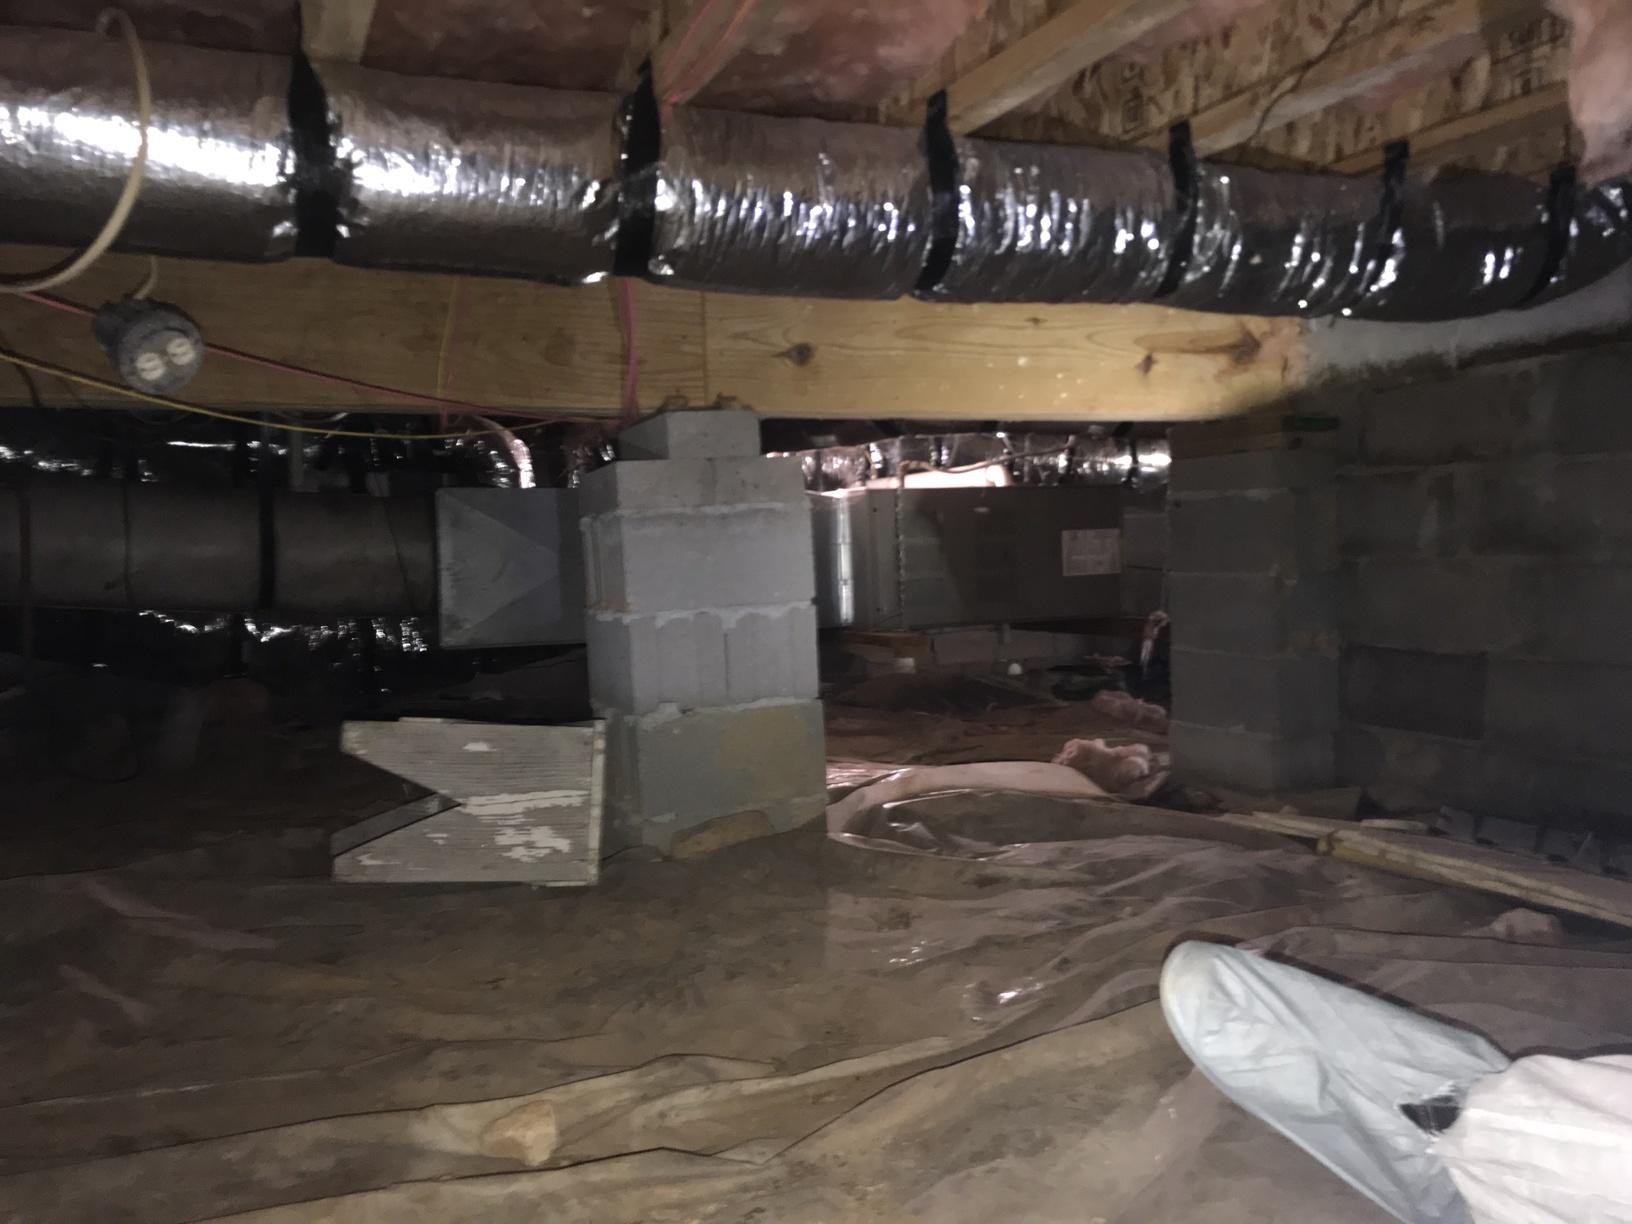 View of crawl space